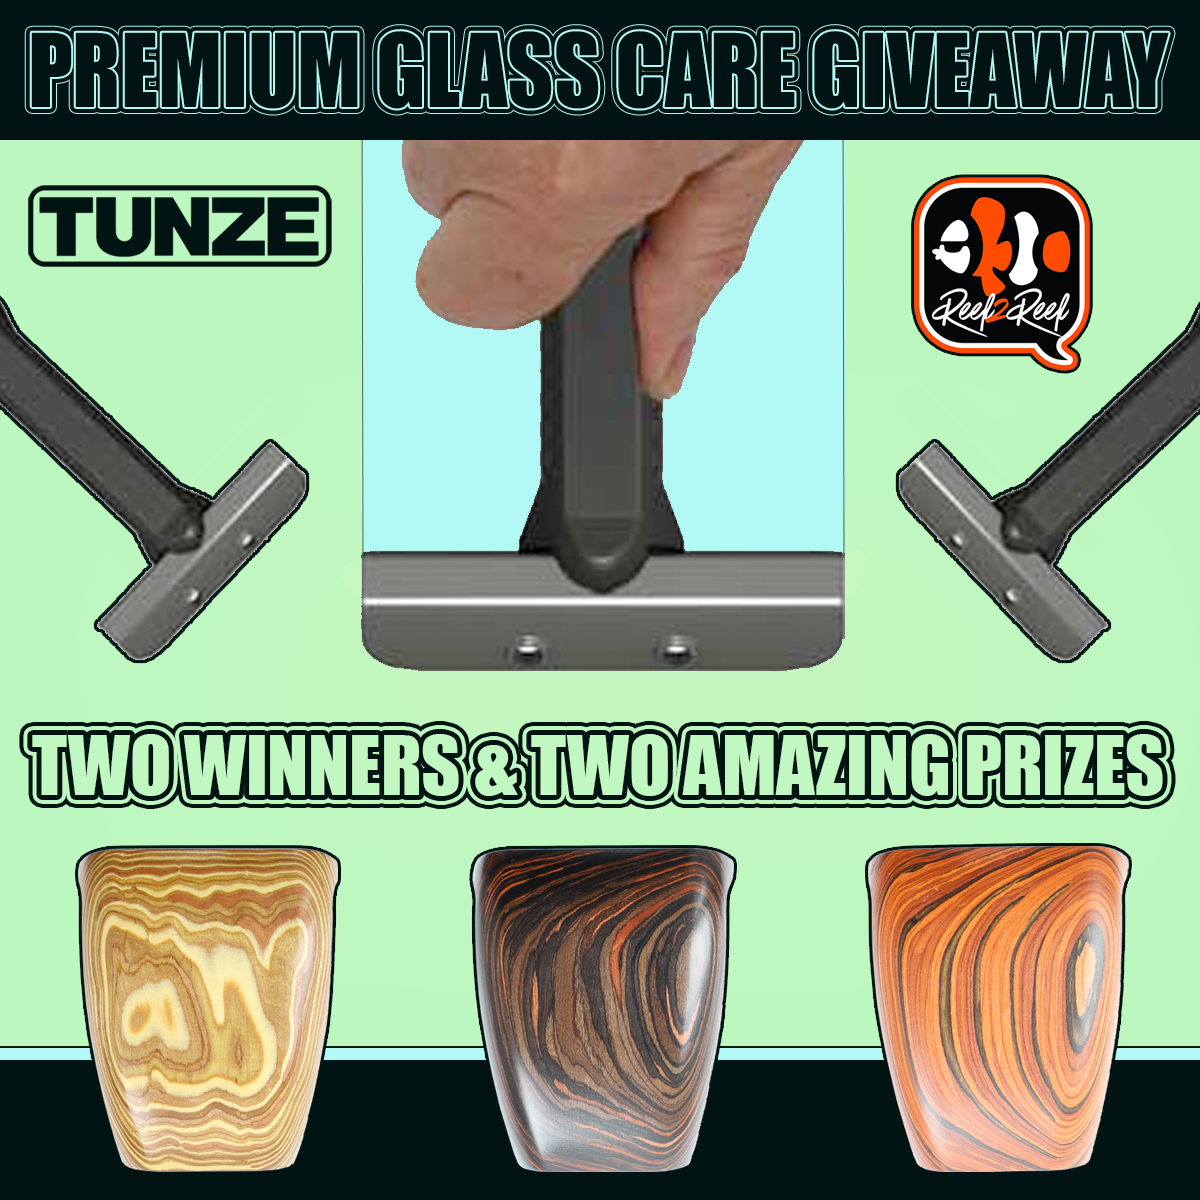 Tunze Giveaway .png